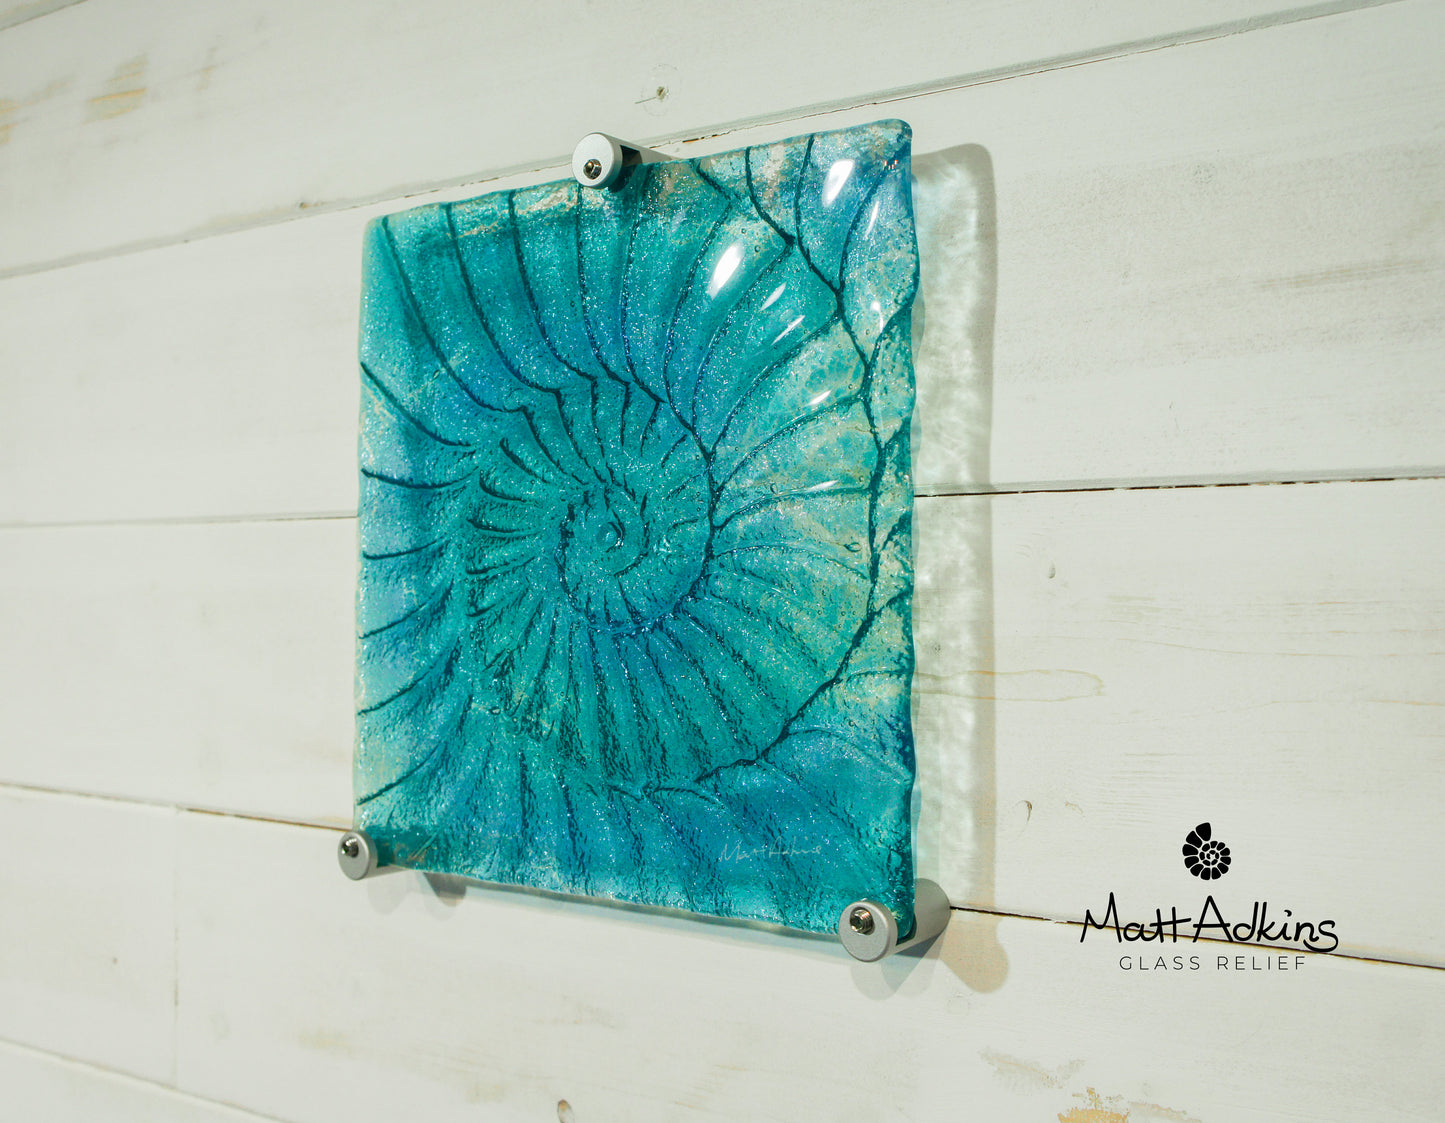 Ammonite Wall Panel - Small Square - Turquoise Blue - 22cm(9") with fixings